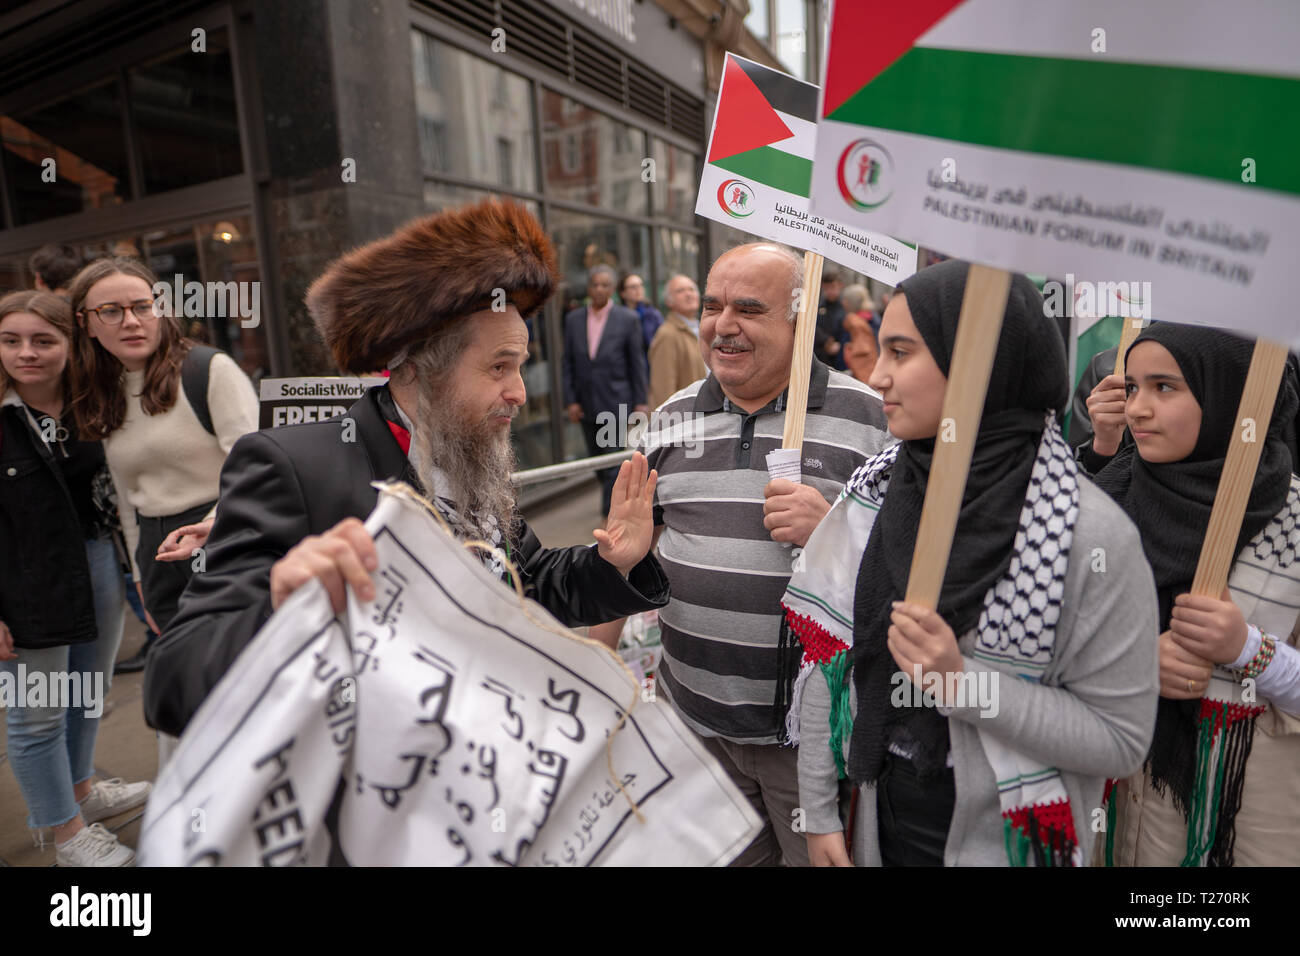 London, UK. 30th March 2019. A, orthodox Jewish protester chats with Palestine supporters at a pro-Palestine demonstration (Exist, Resist Return) outside the Israel embassy in London. Photo date: Saturday, March 30, 2019. Photo: Roger Garfield/Alamy Live News Credit: Roger Garfield/Alamy Live News Stock Photo